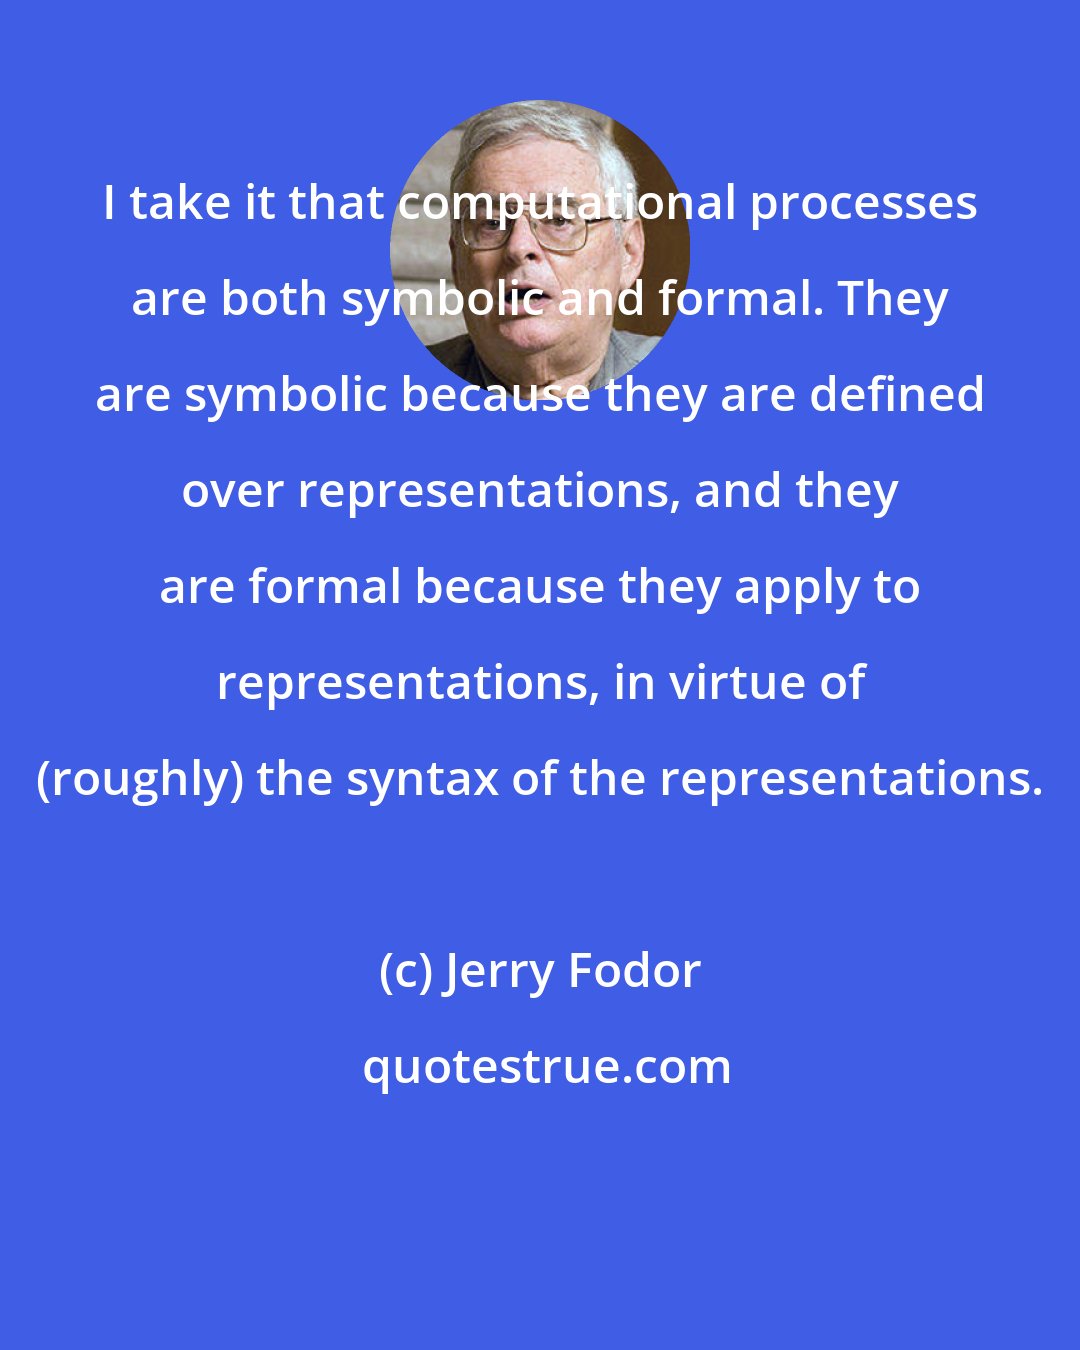 Jerry Fodor: I take it that computational processes are both symbolic and formal. They are symbolic because they are defined over representations, and they are formal because they apply to representations, in virtue of (roughly) the syntax of the representations.